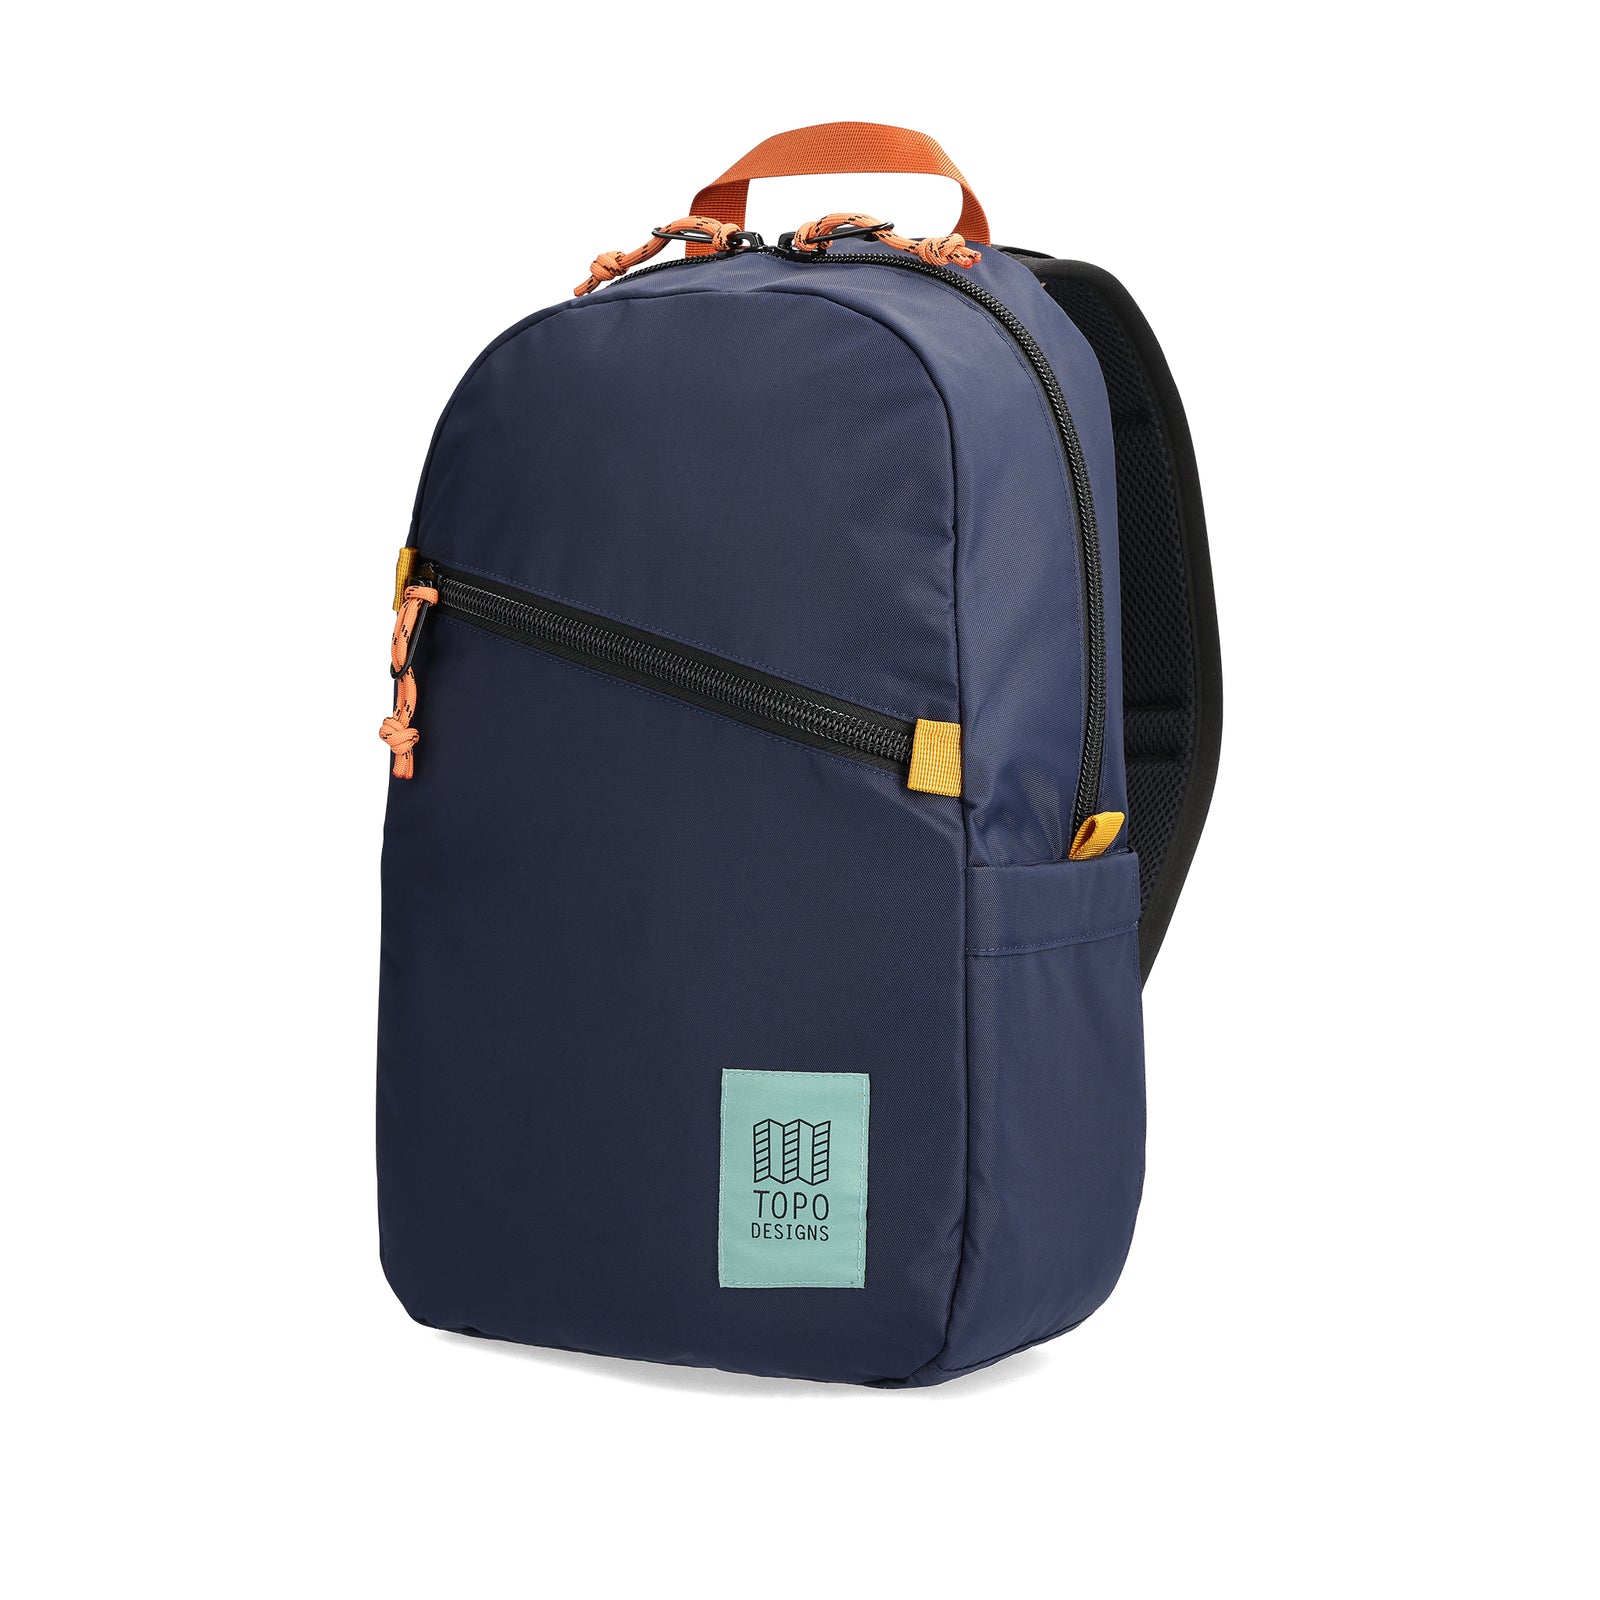 Front View of Topo Designs Light Pack in "Navy / Multi"